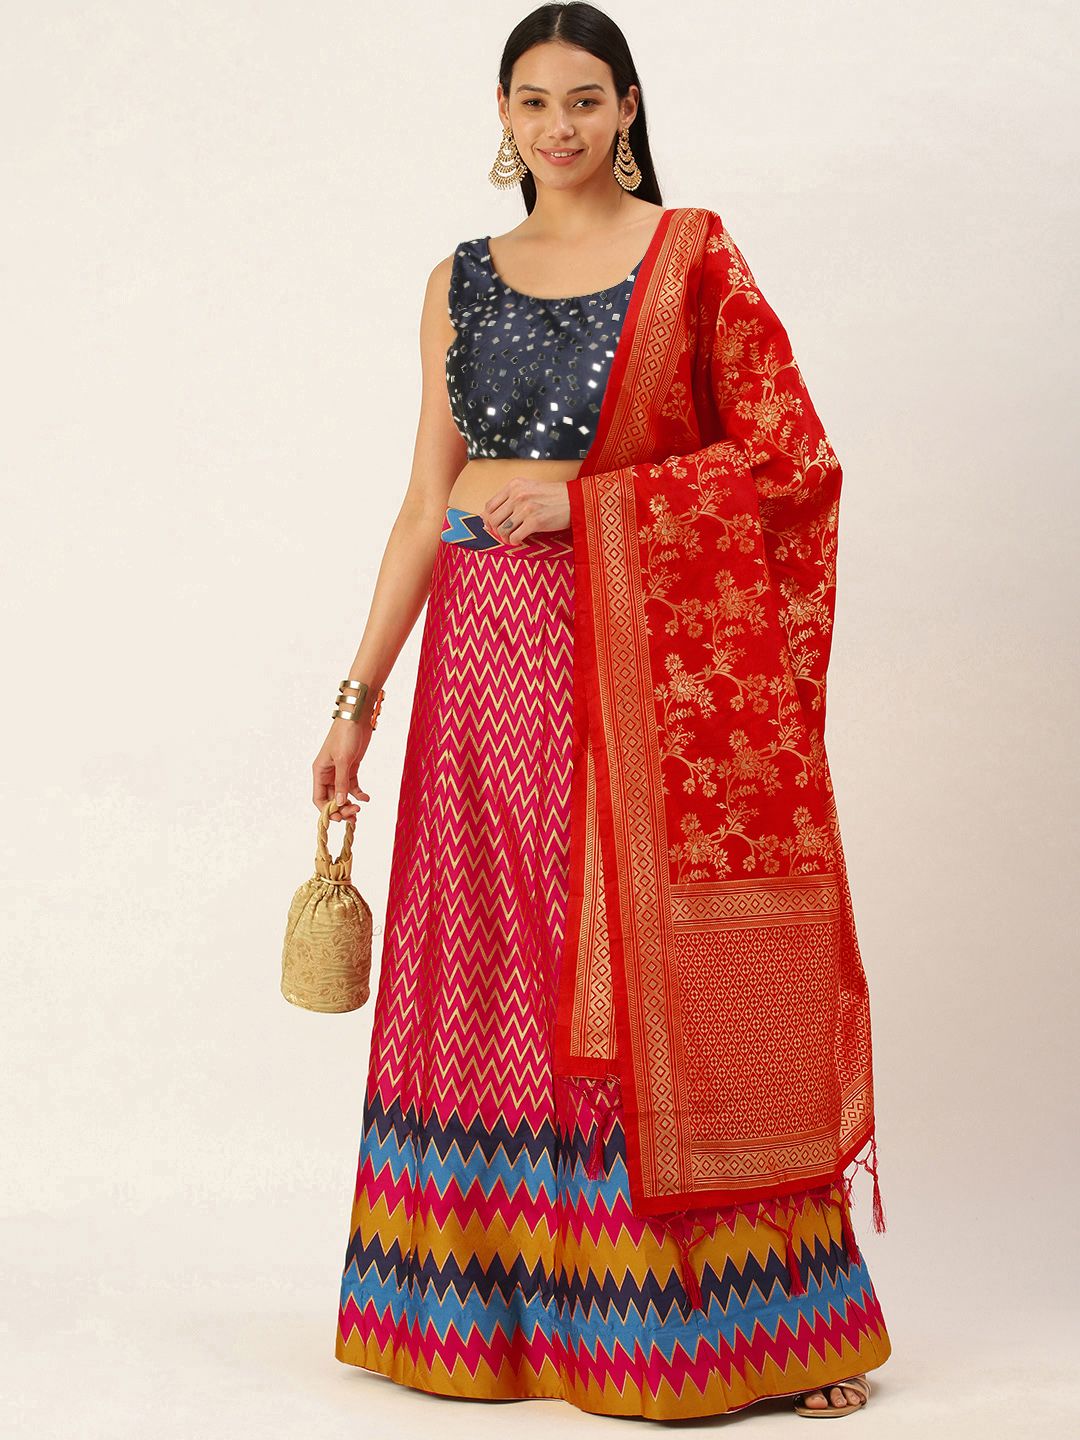 Mameraa Pink & Navy Blue Embellished Semi-Stitched Lehenga & Ready to Wear Blouse With Dupatta Price in India